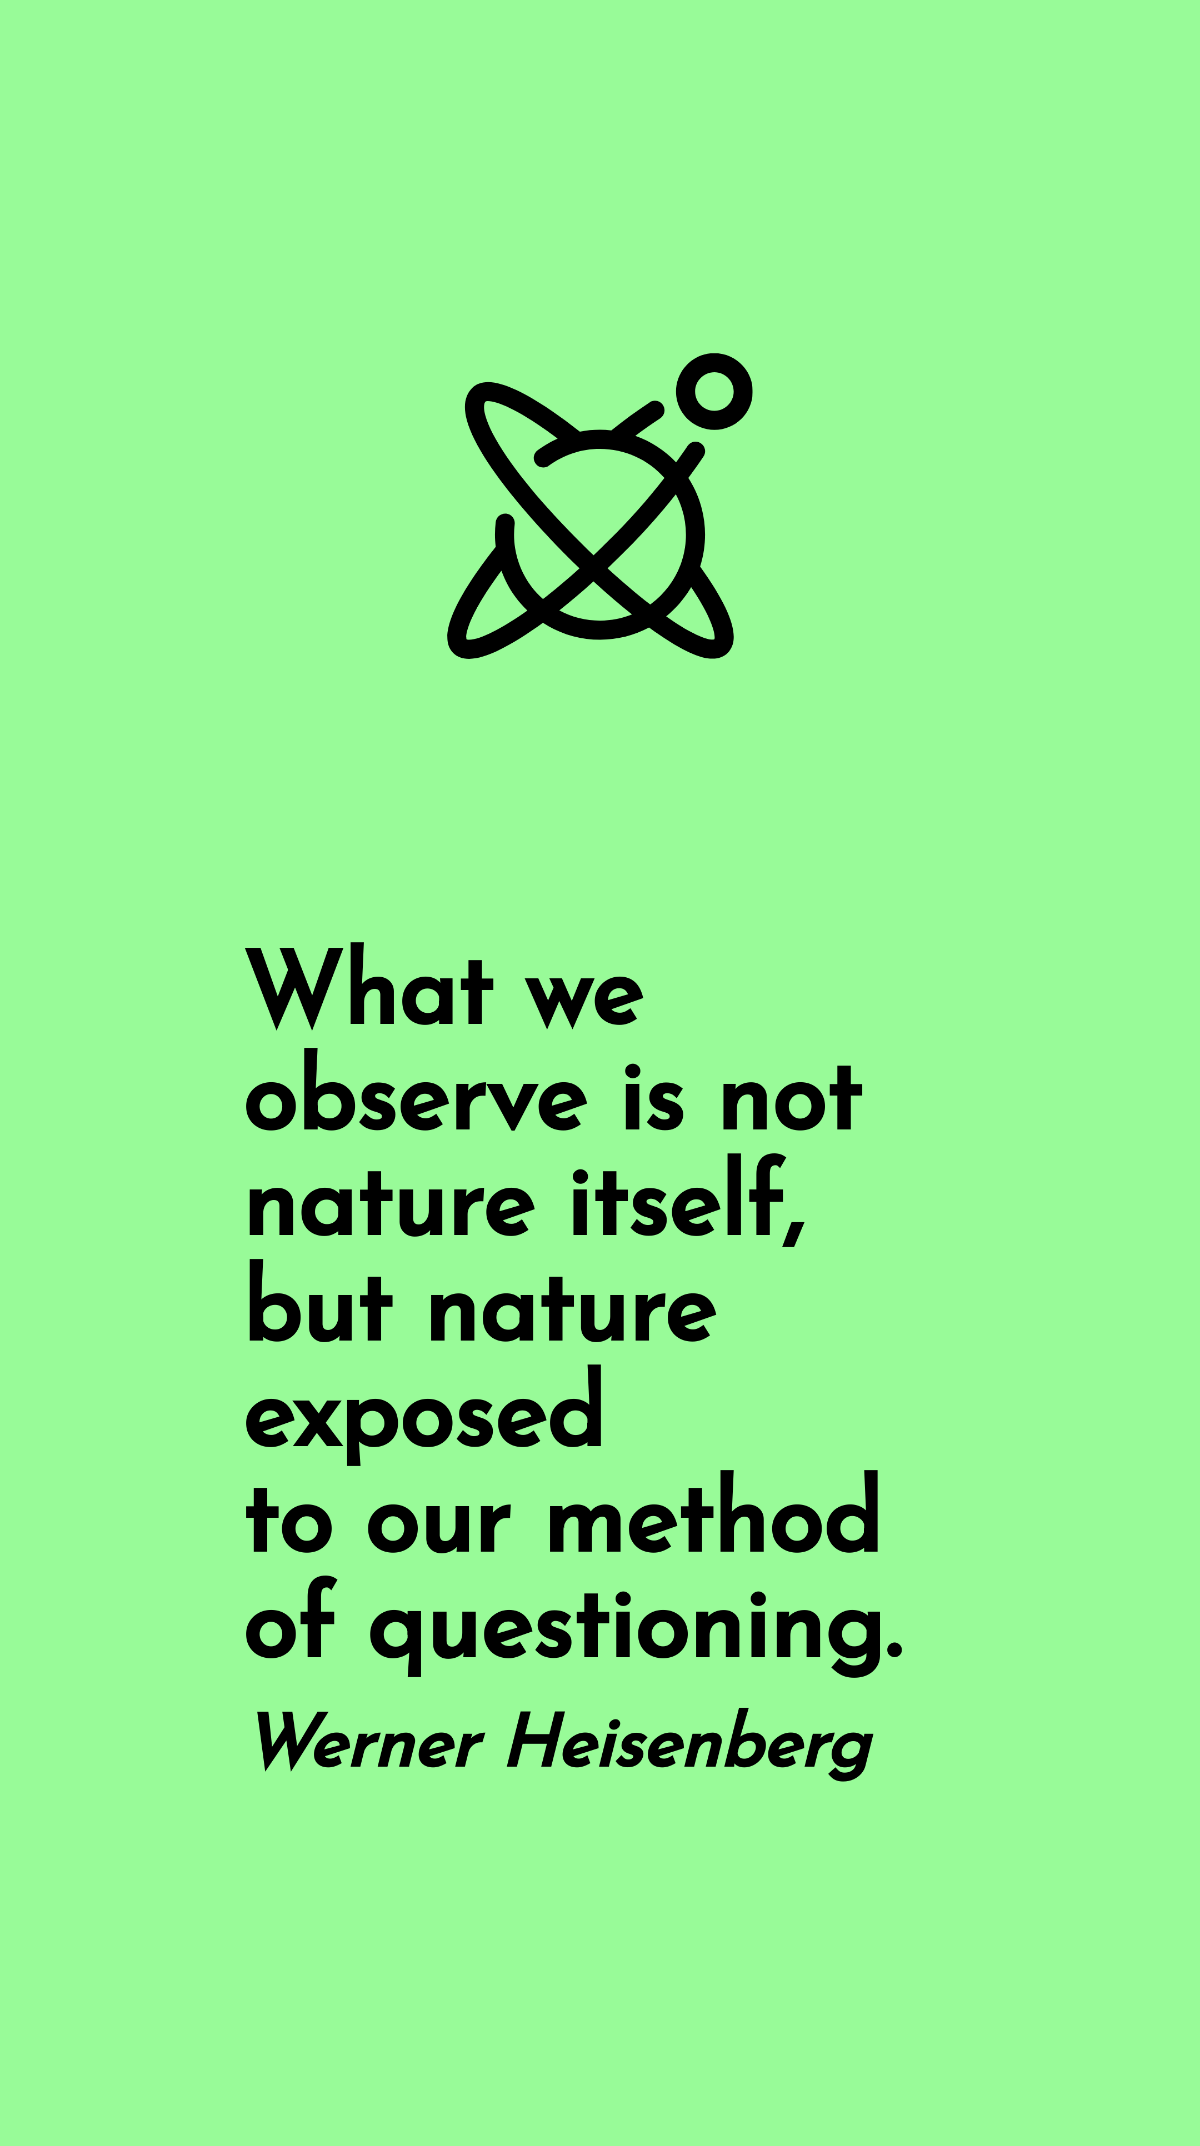 Werner Heisenberg - What we observe is not nature itself, but nature exposed to our method of questioning.